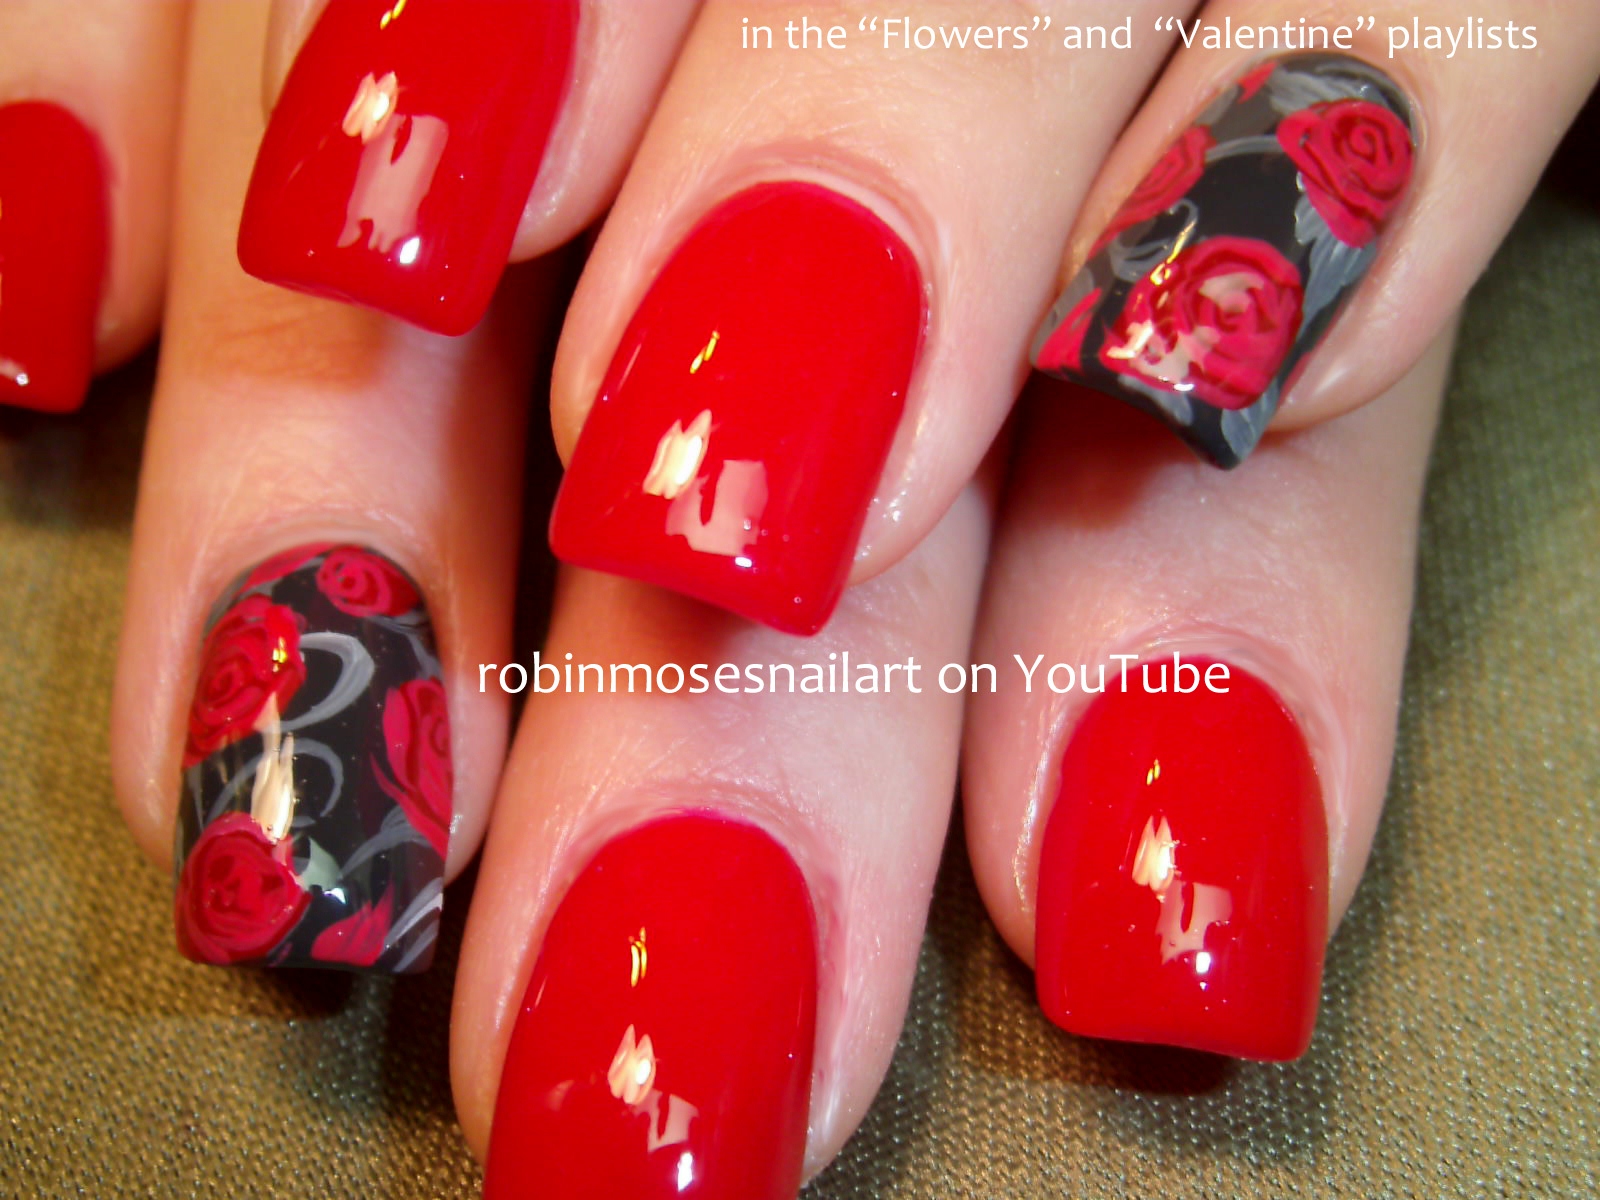 4. "Romantic Red Nail Colors for Valentine's Day" - wide 9